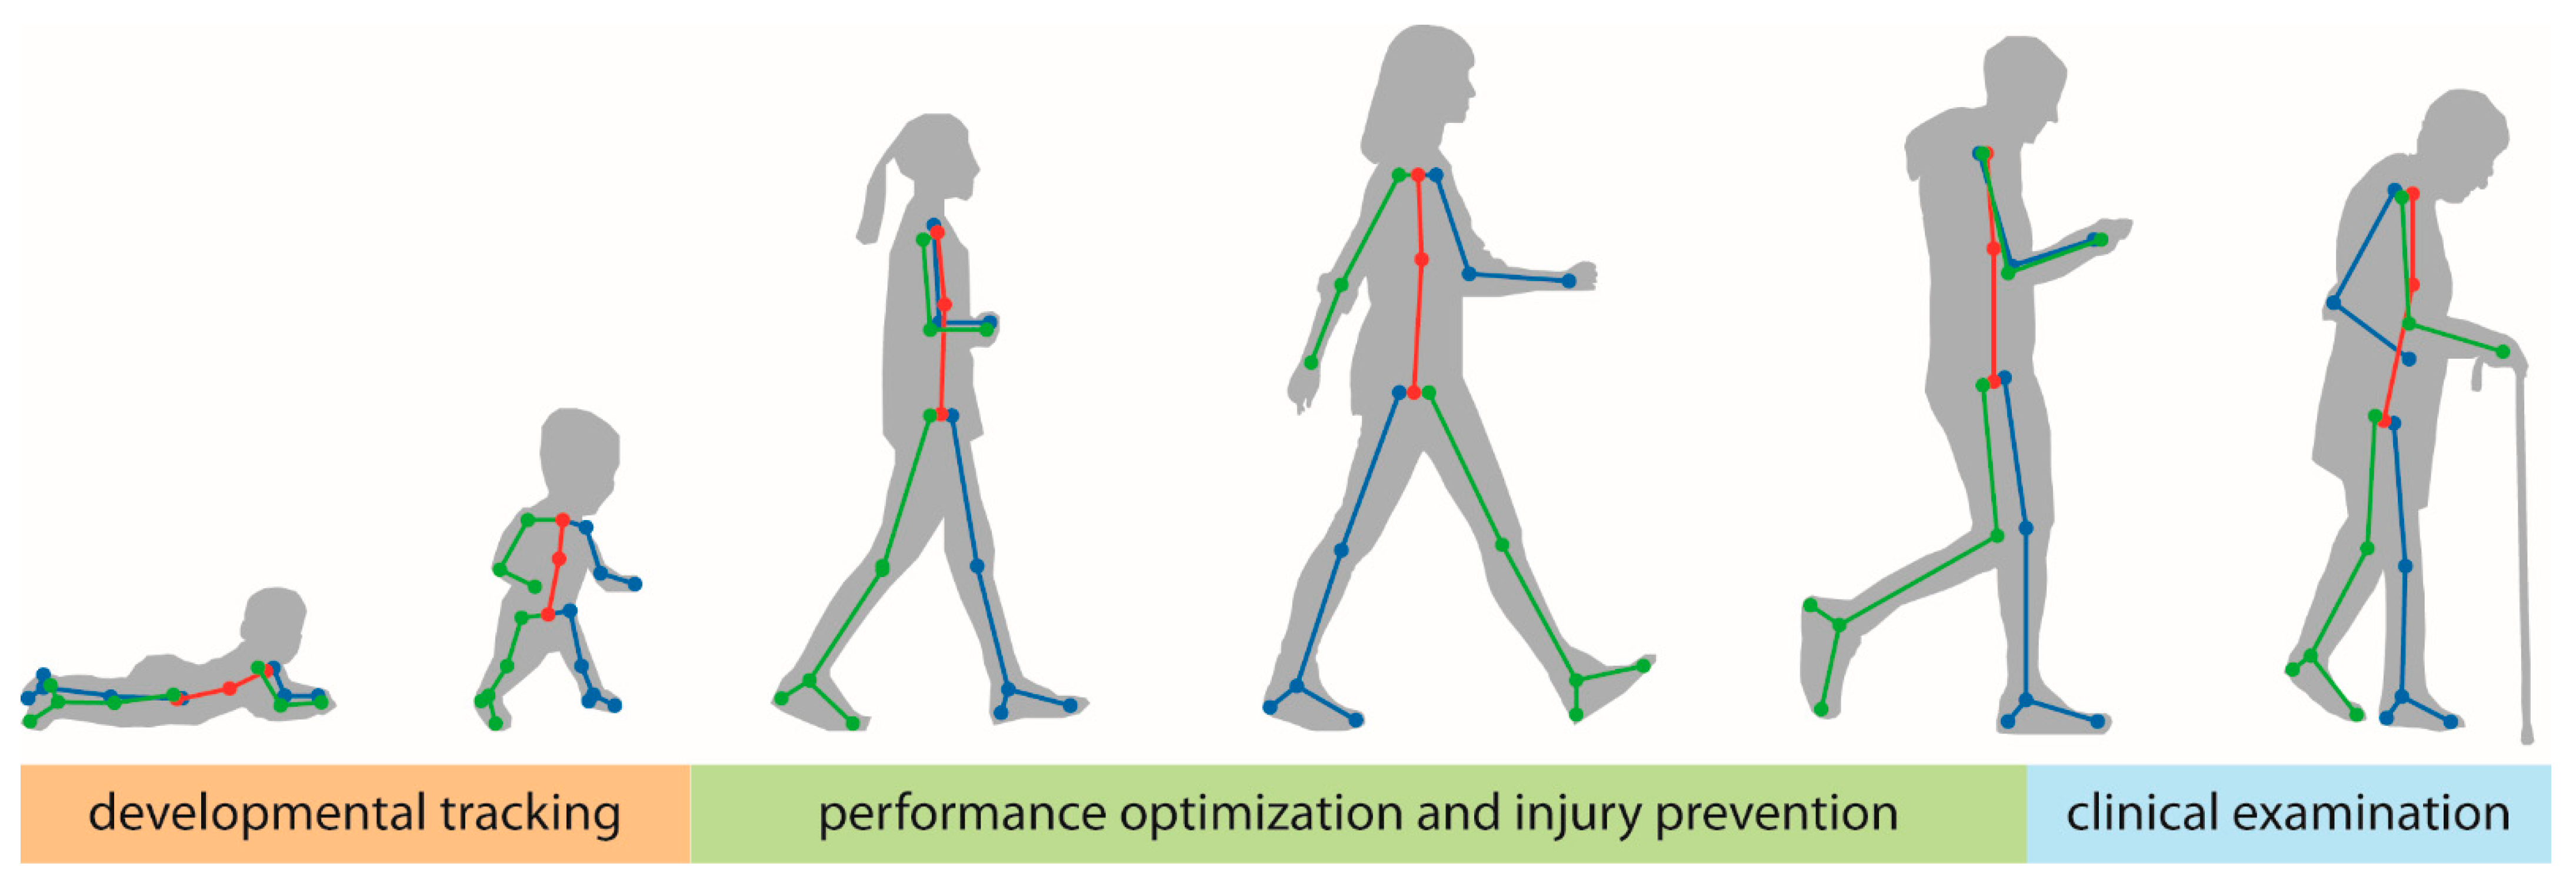 Detecting human body poses in an image | Apple Developer Documentation